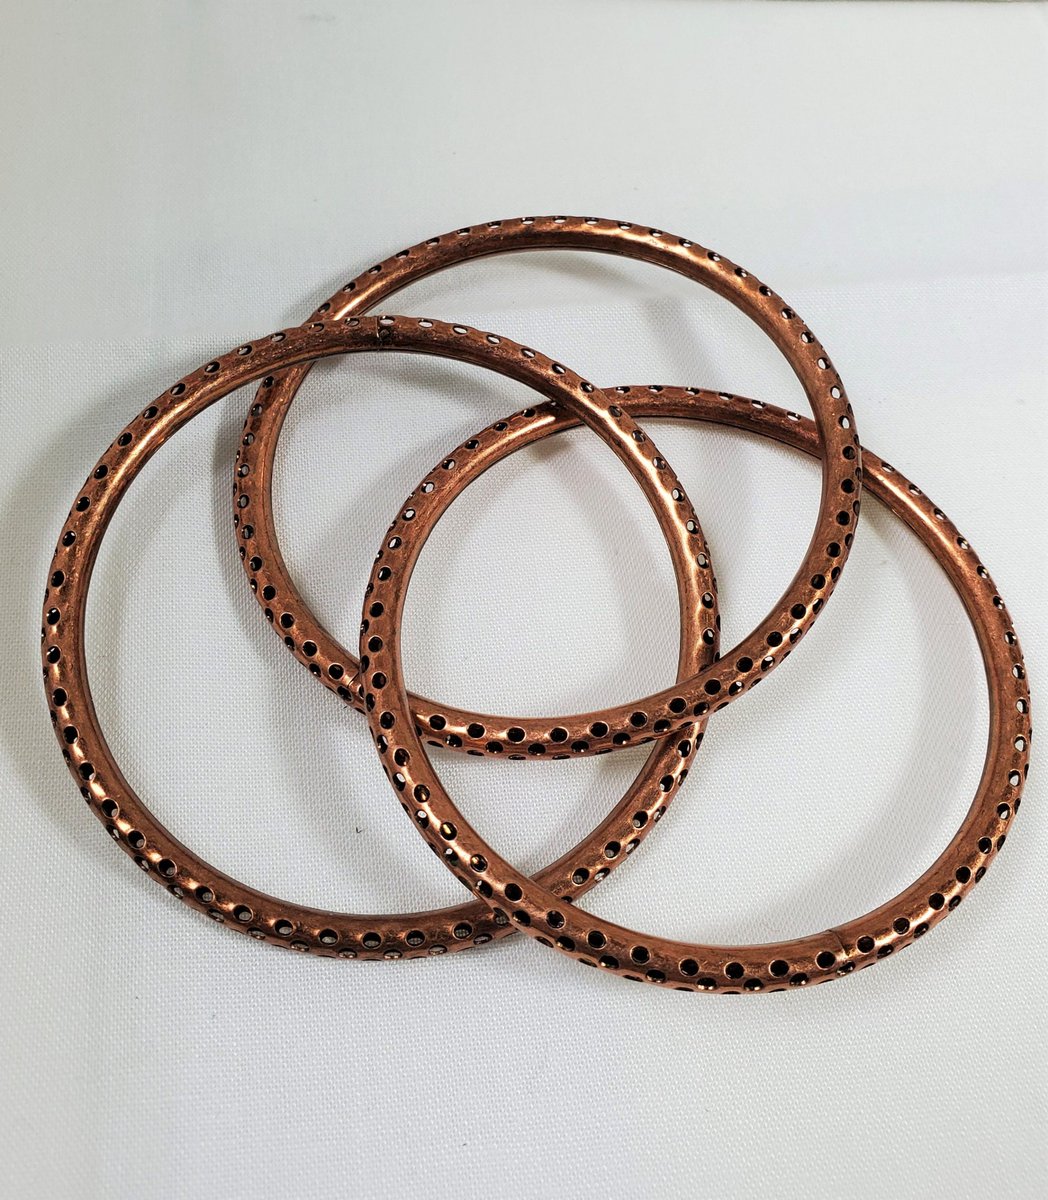 Bracelets Three Copper Bangle Vintage Ornate Attached Bracelets Jewelry Copper Lover Gift For Her or Him Etsy | @sylcameojewels tuppu.net/5fa6ff8 #Etsy #SylCameoJewelsStore #SmallShops #GiftsUnder30